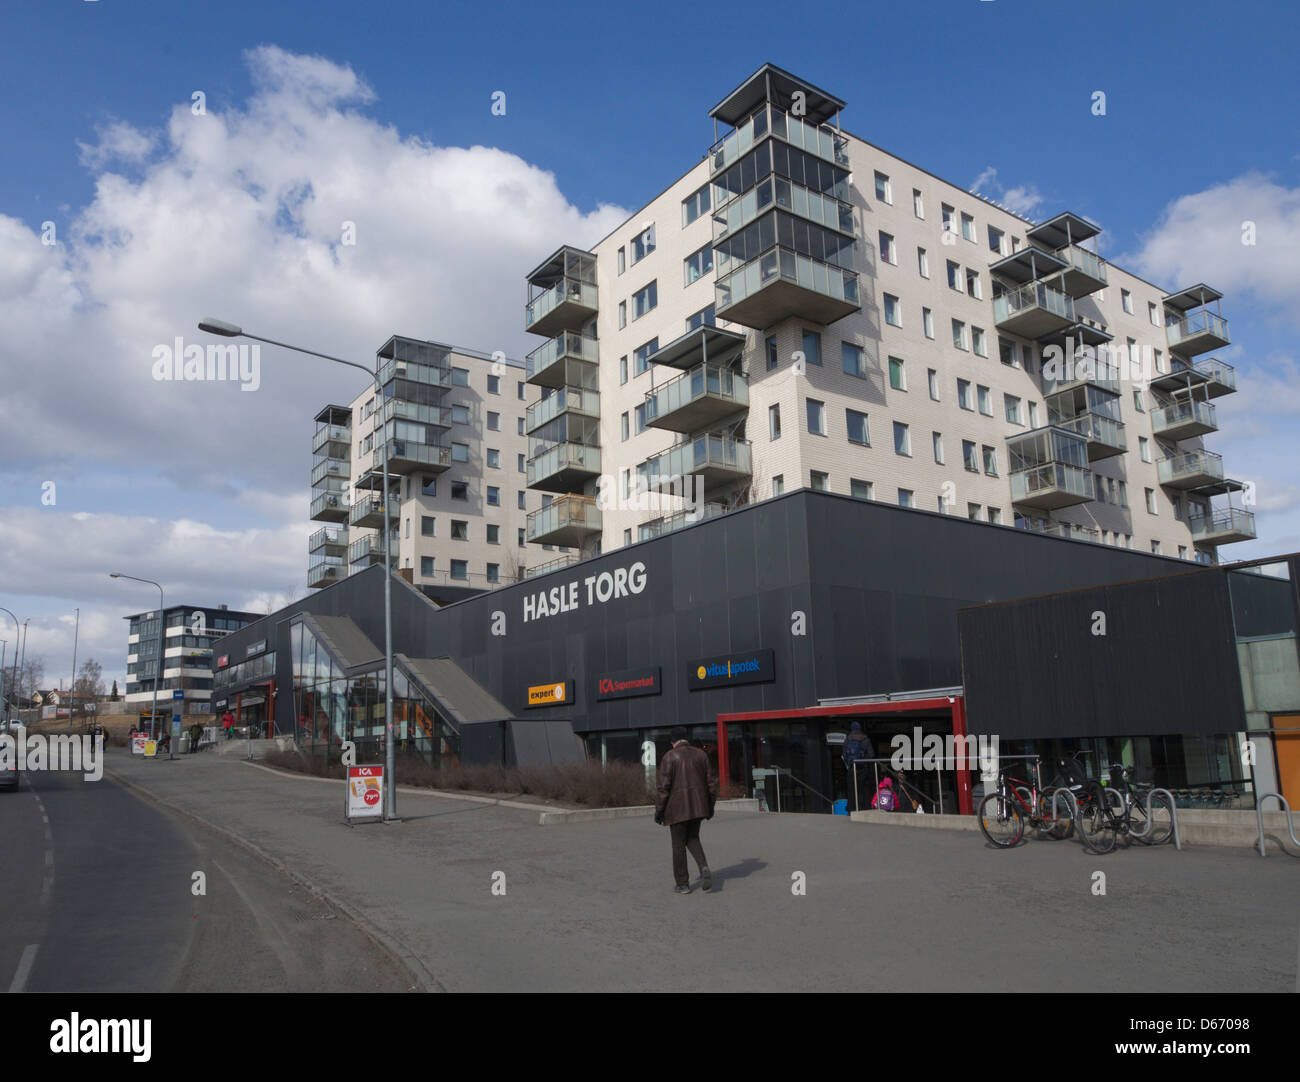 Hasle torg, modern apartment blocks with small shopping center in the suburbs of Oslo Norway Stock Photo